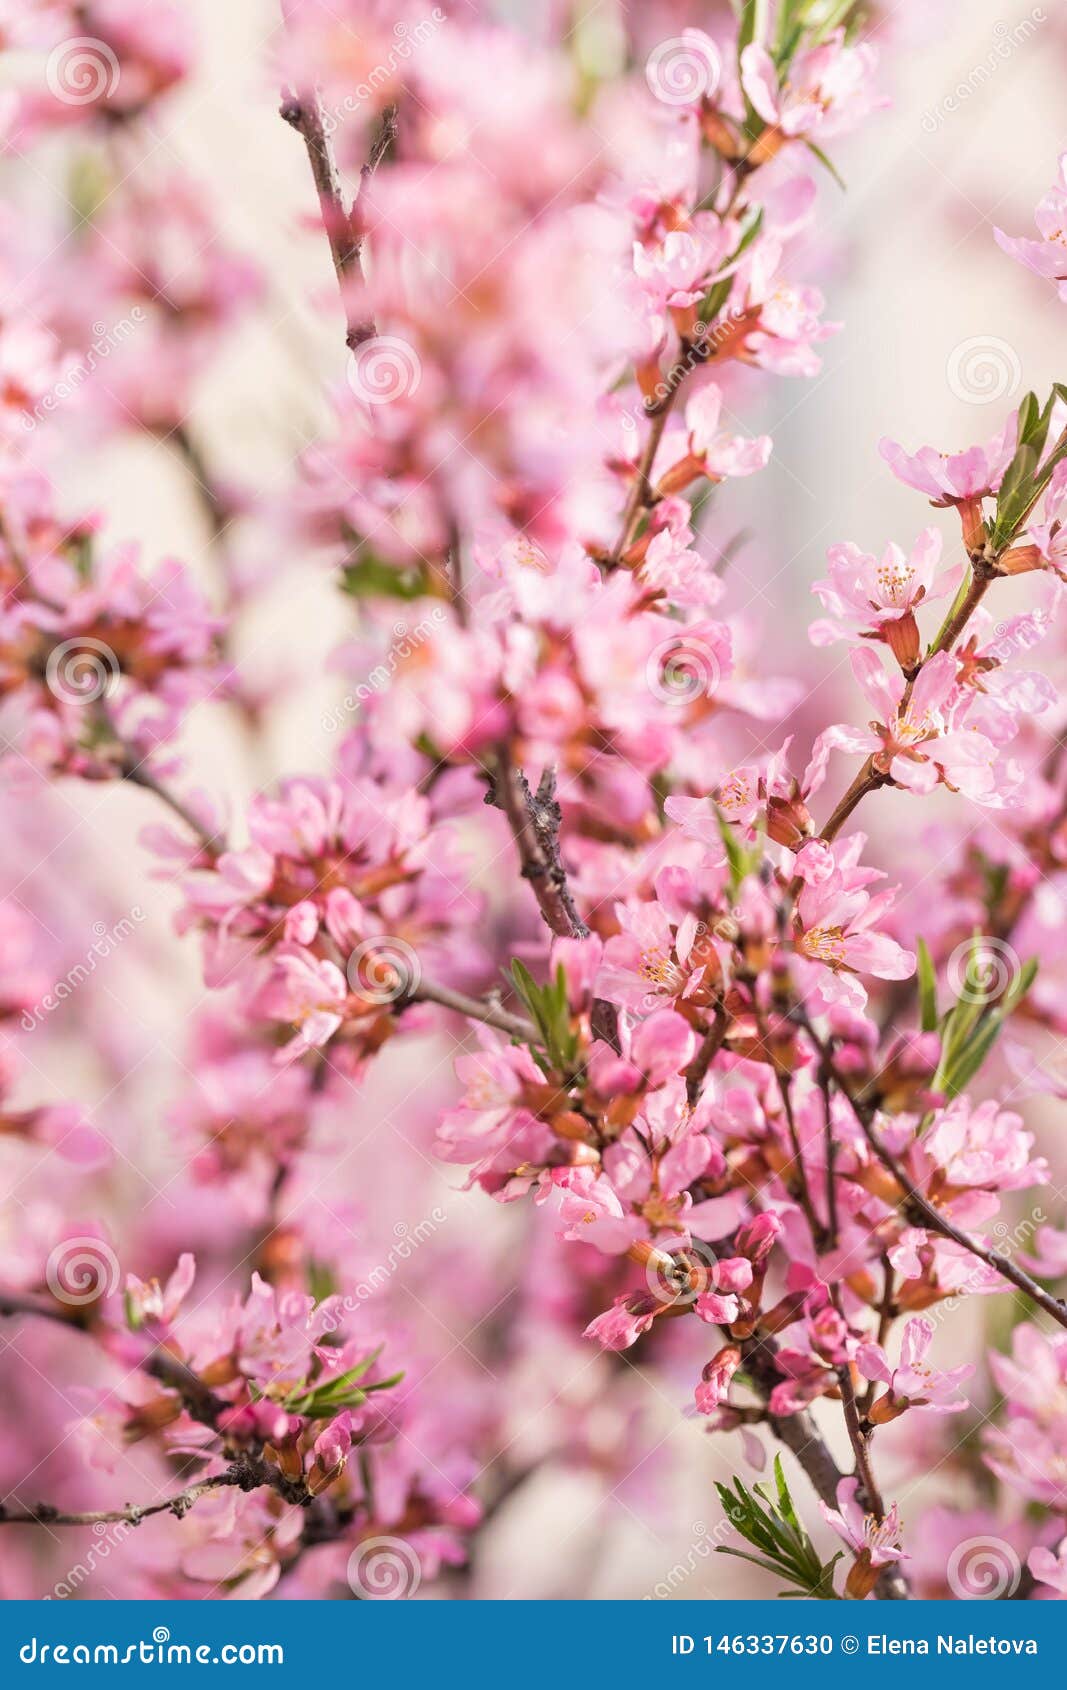 the blossoming spring bush with flowers of pink color. plentiful seasonal blossoming.